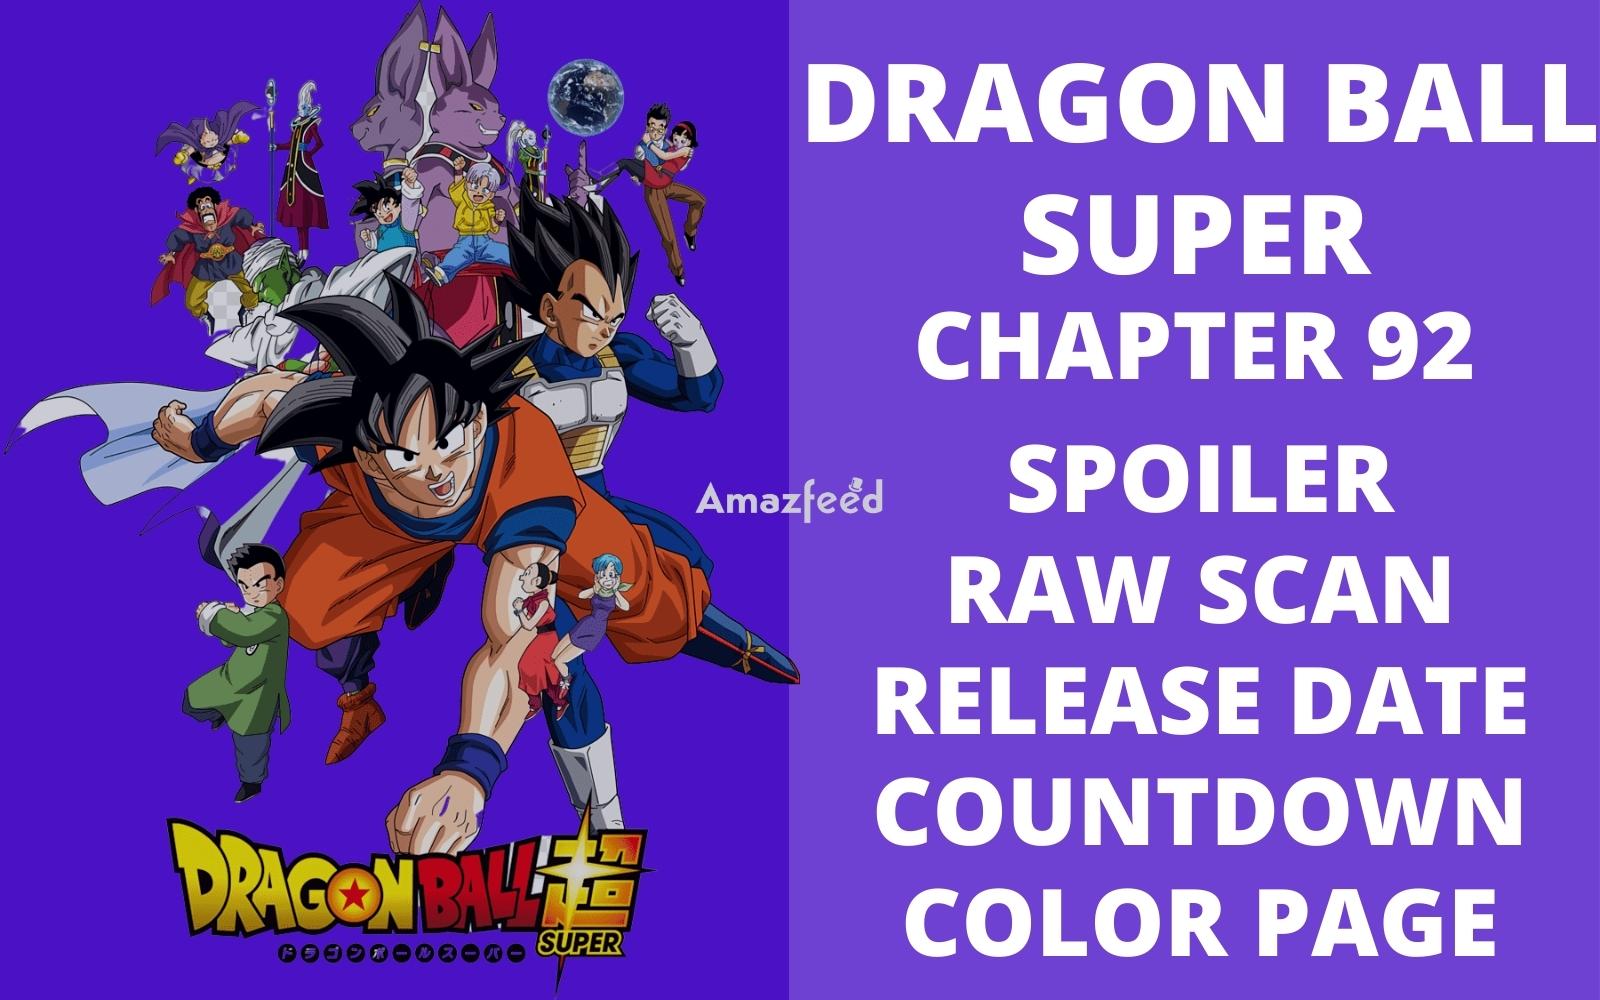 Dragon Ball Super Chapter 99 Spoiler, Raw Scan, Release Date, and